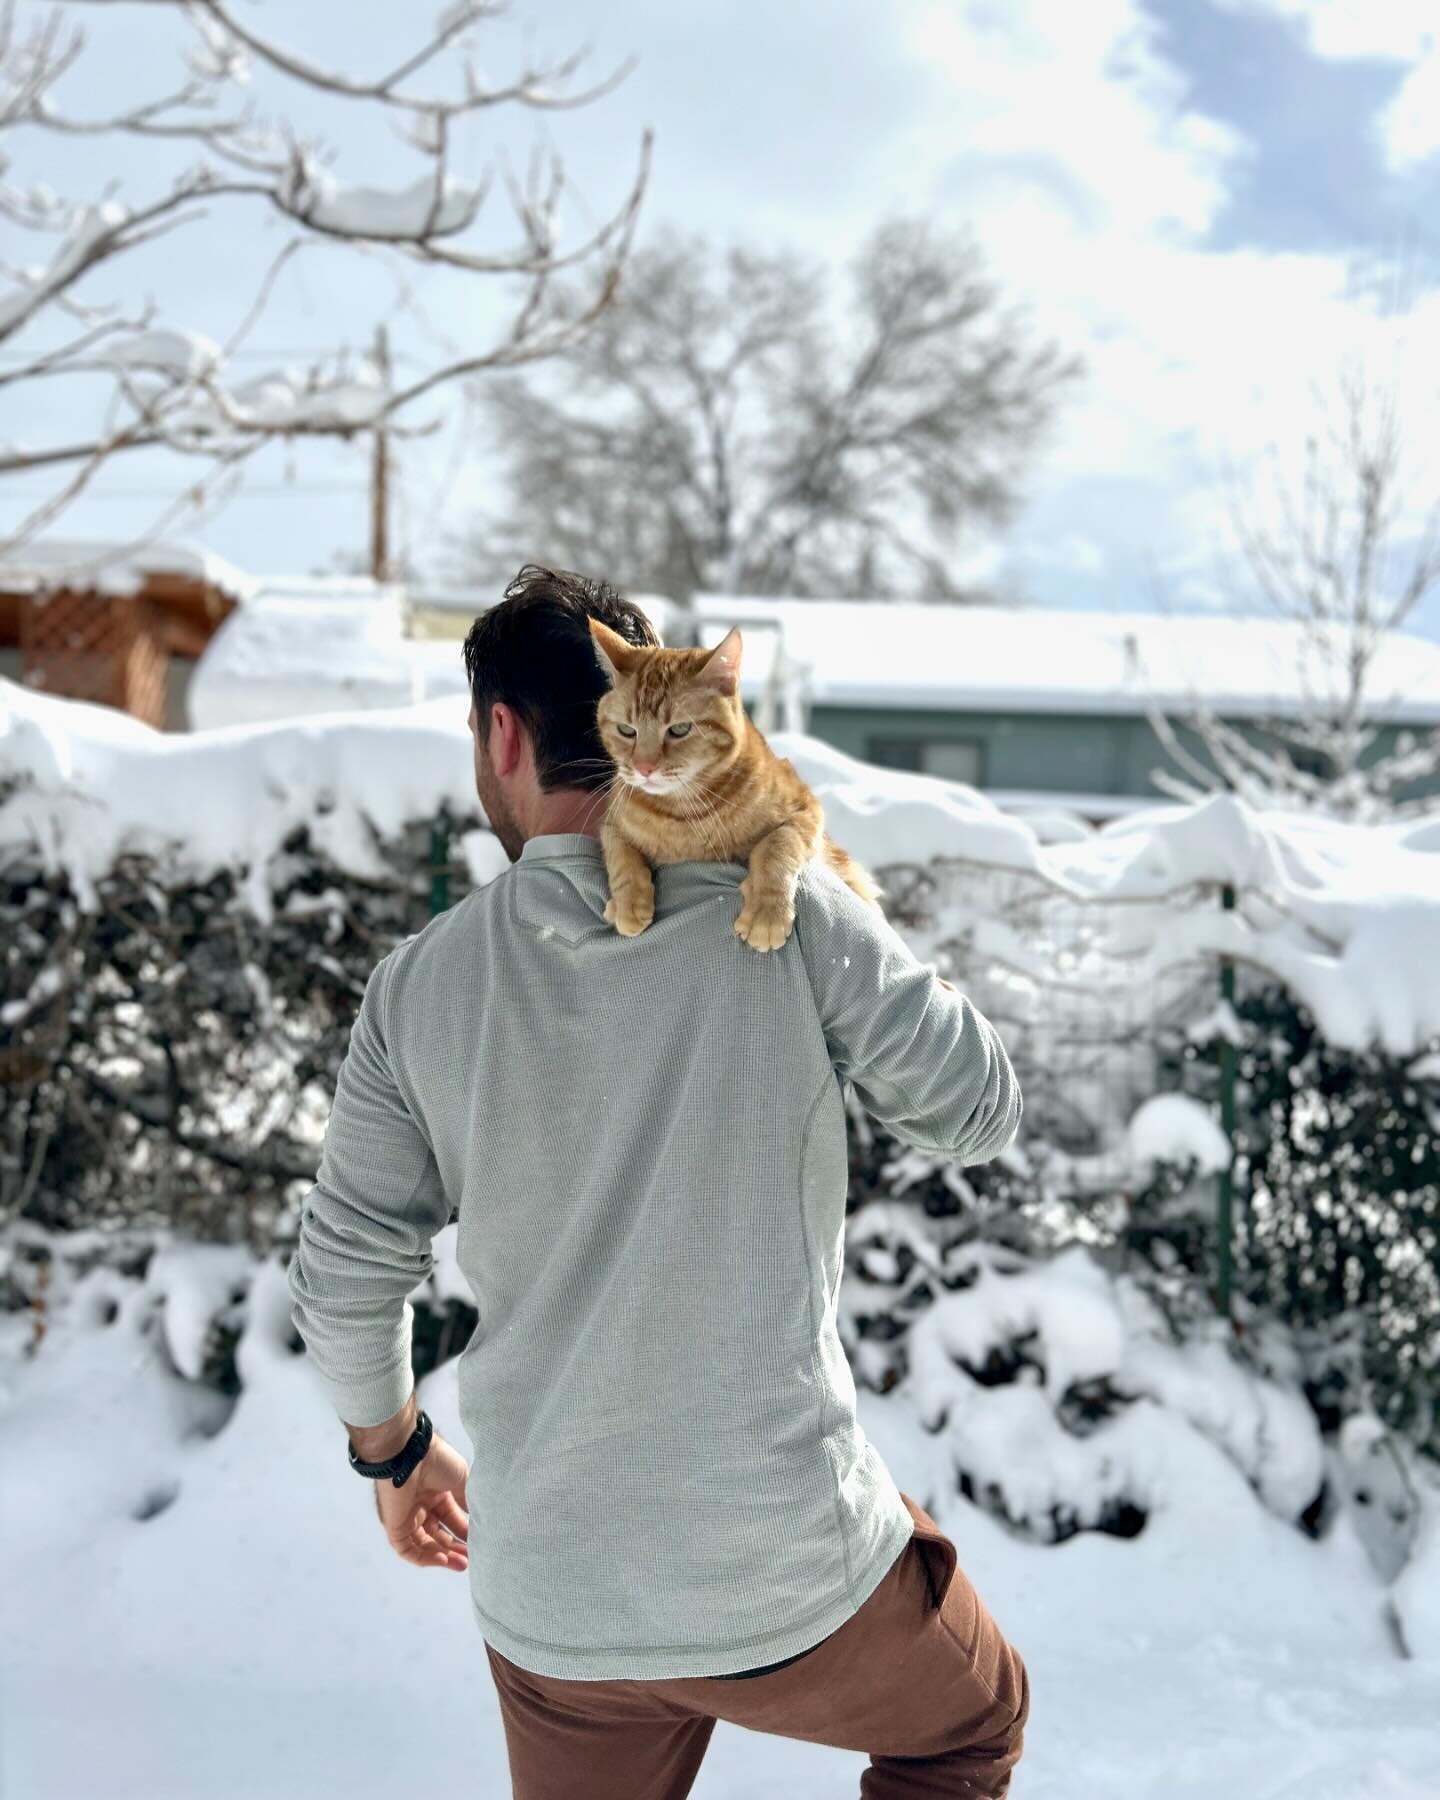 After the storm, this San Diego transplant needs assistance from his dad to explore the backyard 🐈❄️ #snowday #monkeycat #coldpaws